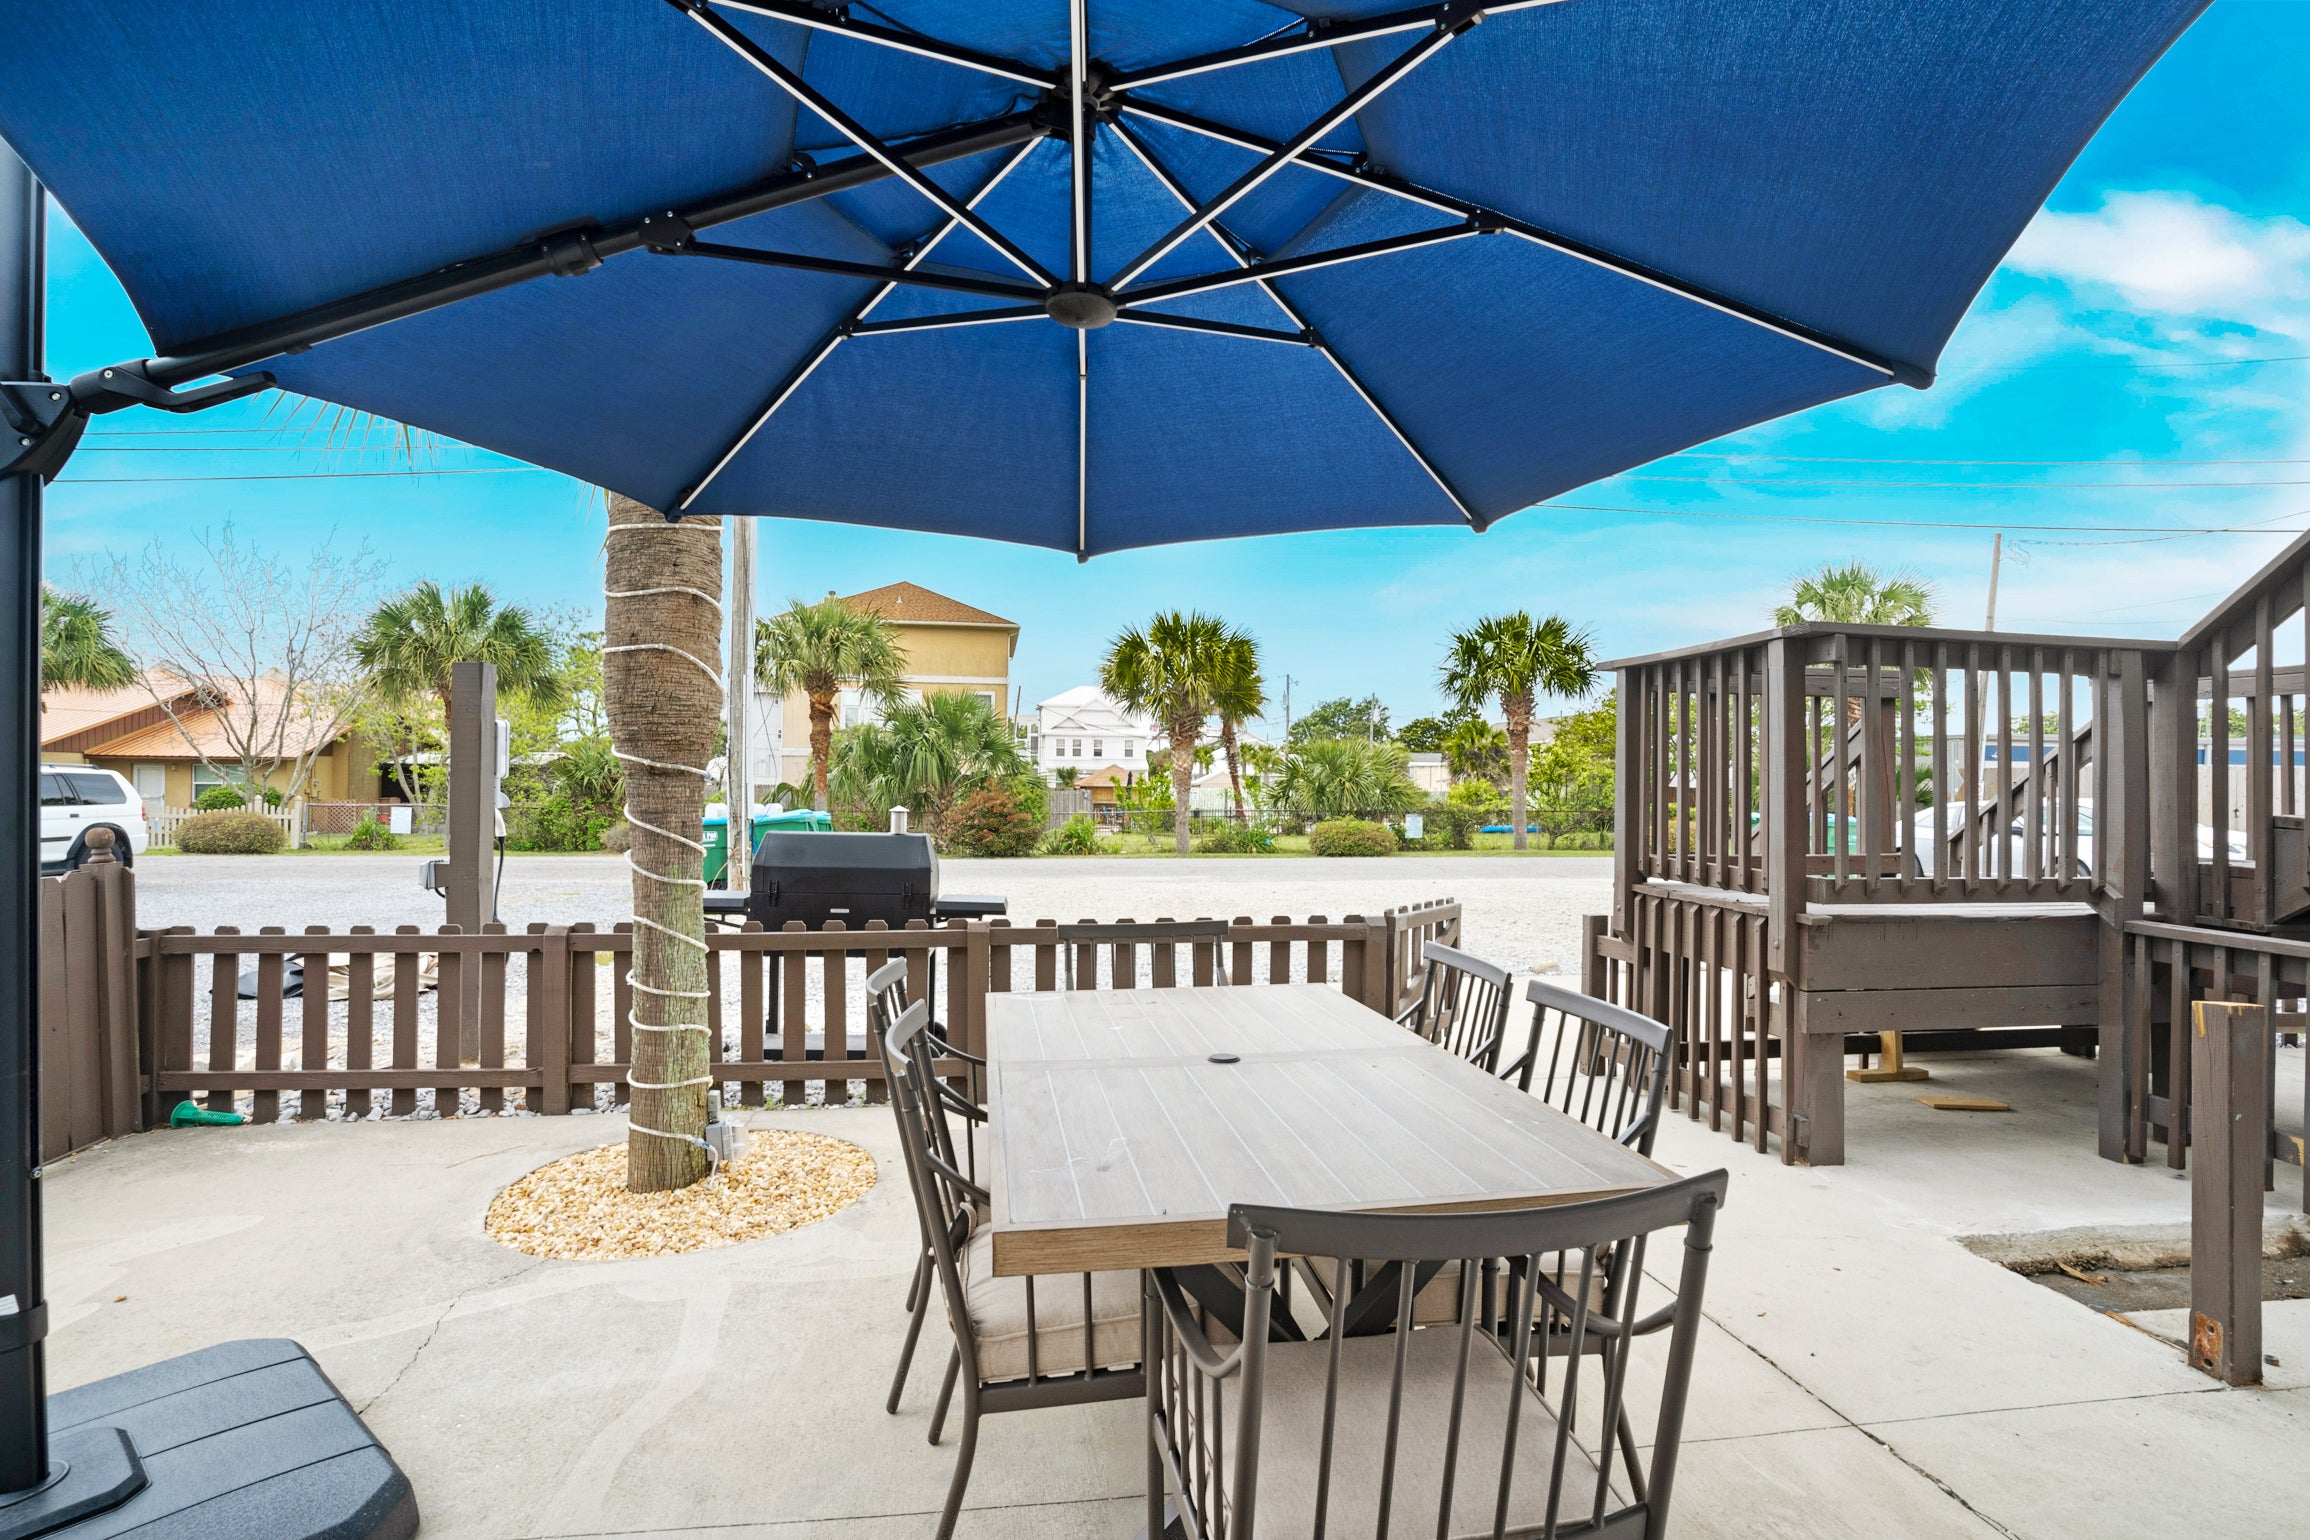 Enjoy a meal on the patio